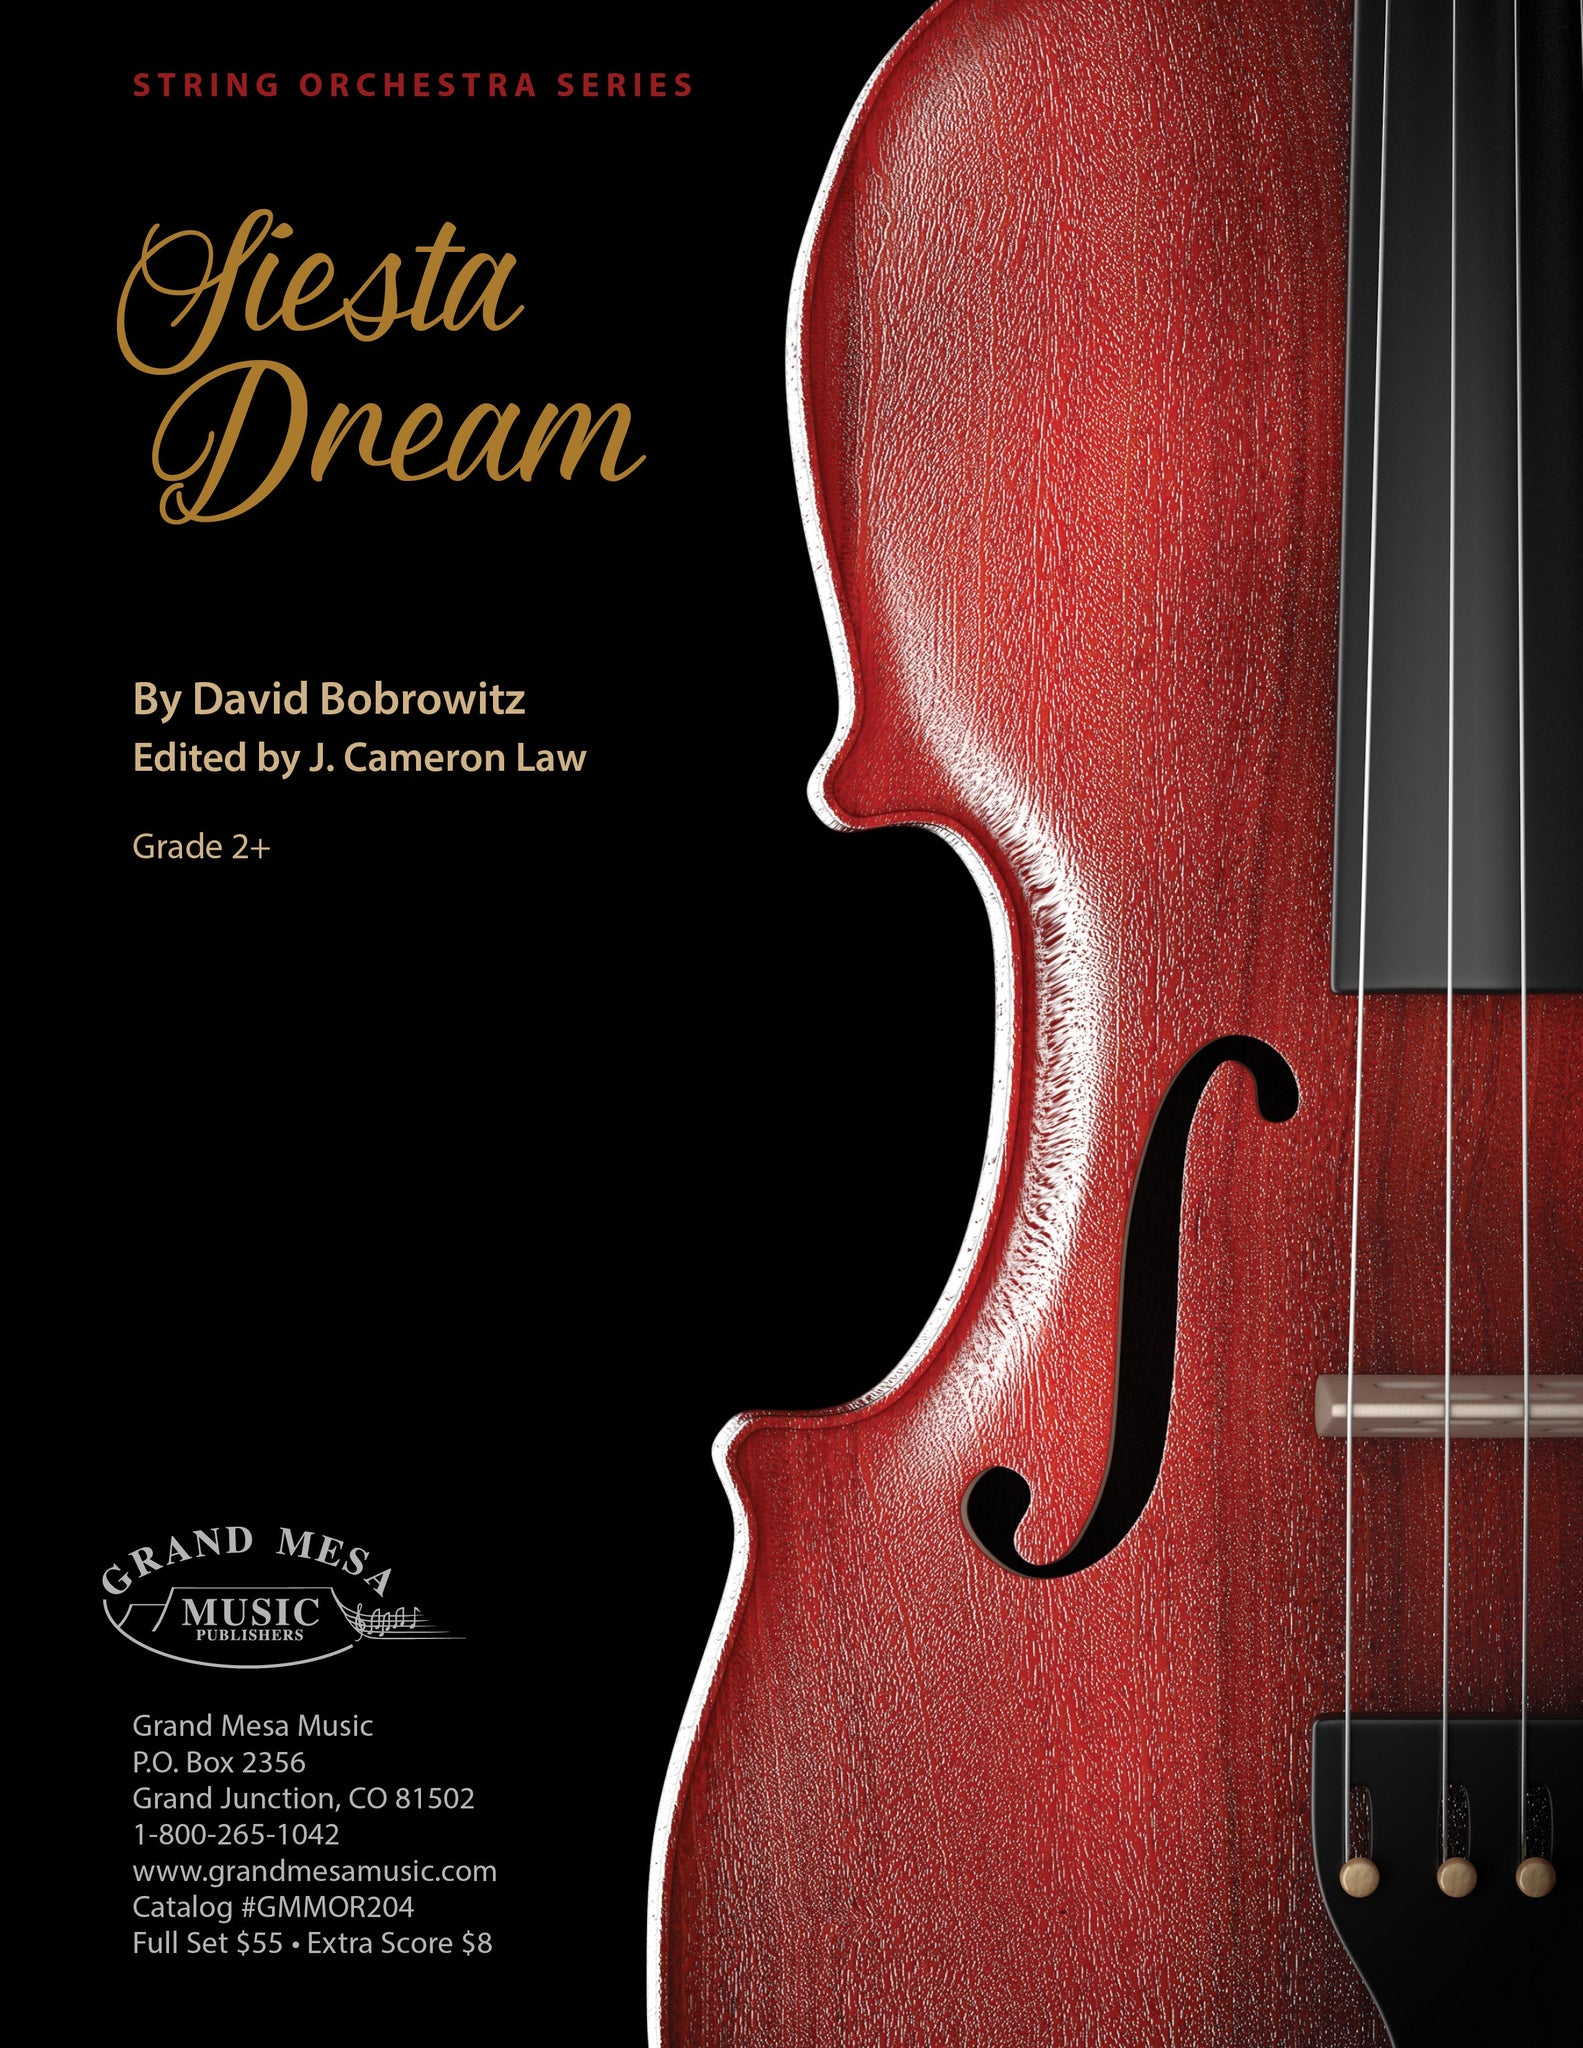 Strings sheet music cover of Siesta Dream, composed by David Bobrowitz.